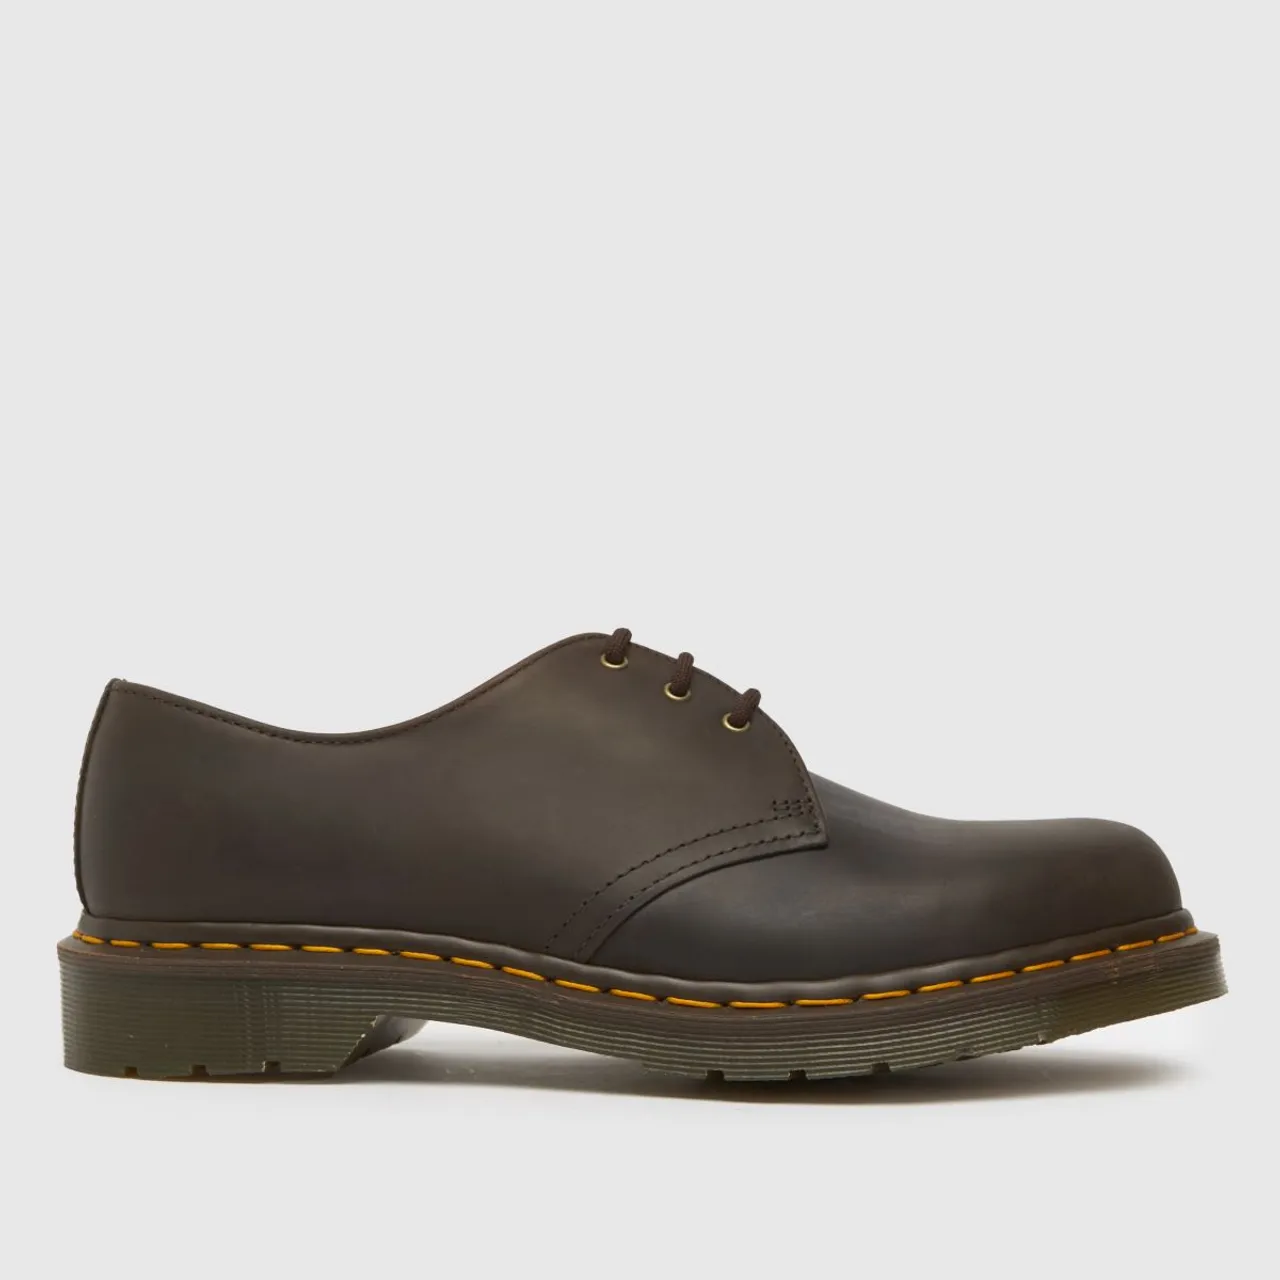 Dr Martens 1461 3 Eye Shoe Shoes In Brown